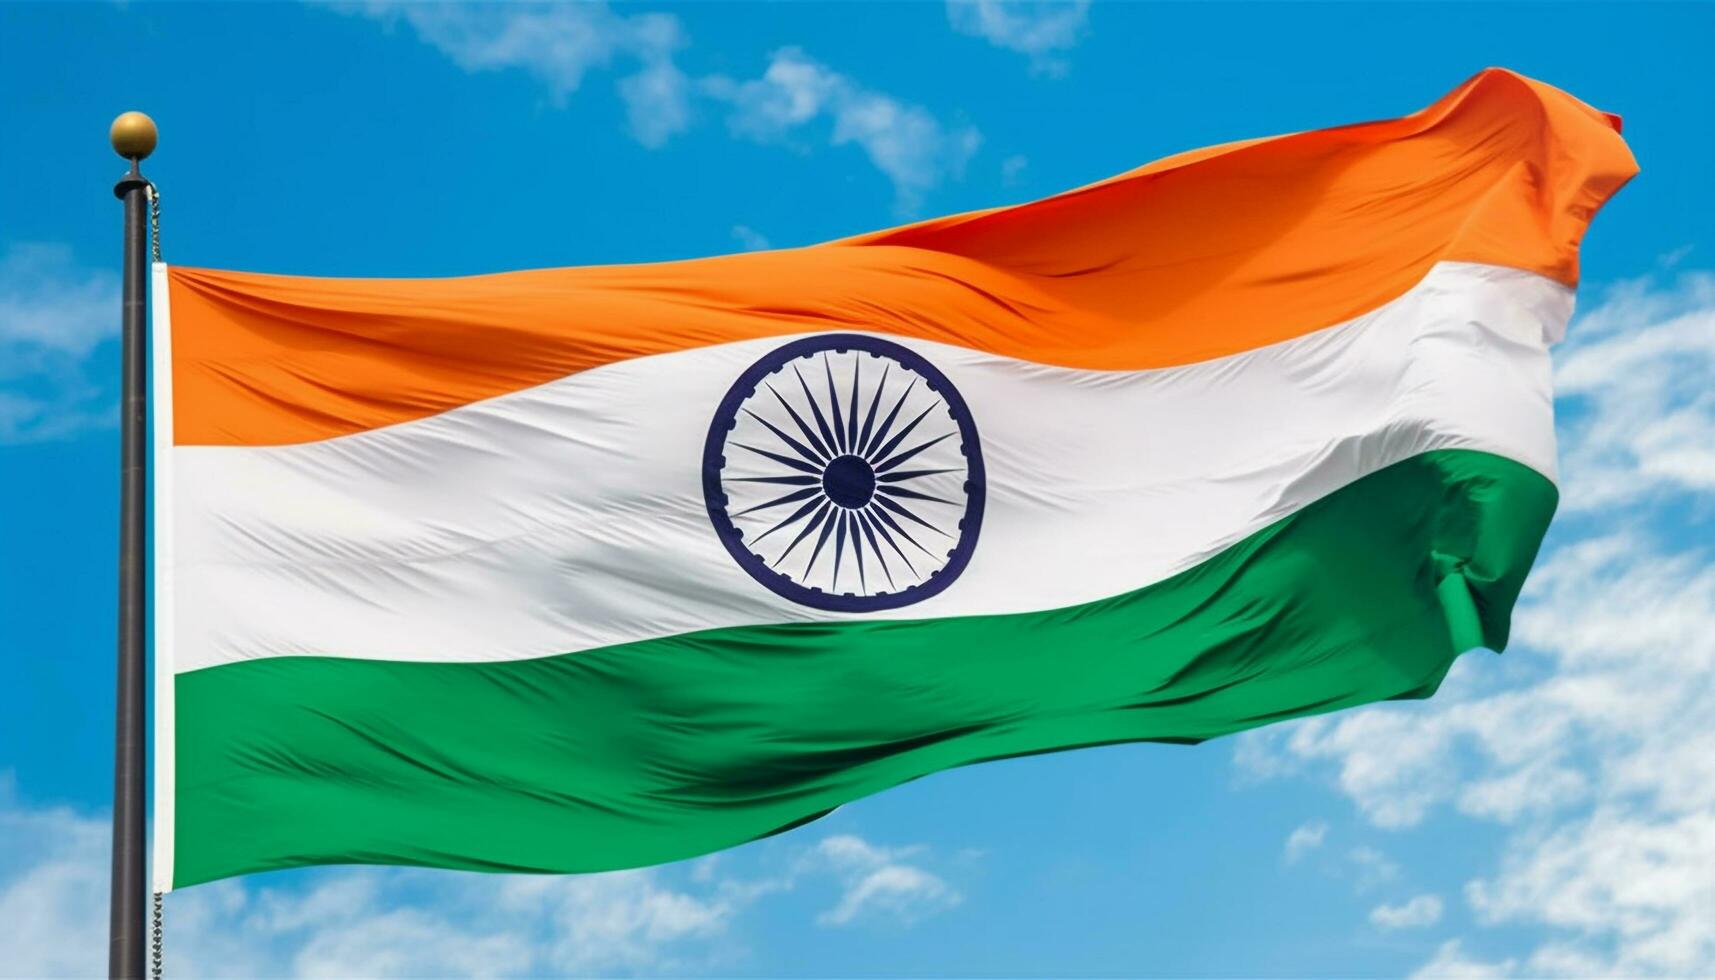 Indian flag waving majestically in the sky, symbolizing freedom and patriotism generated by AI photo